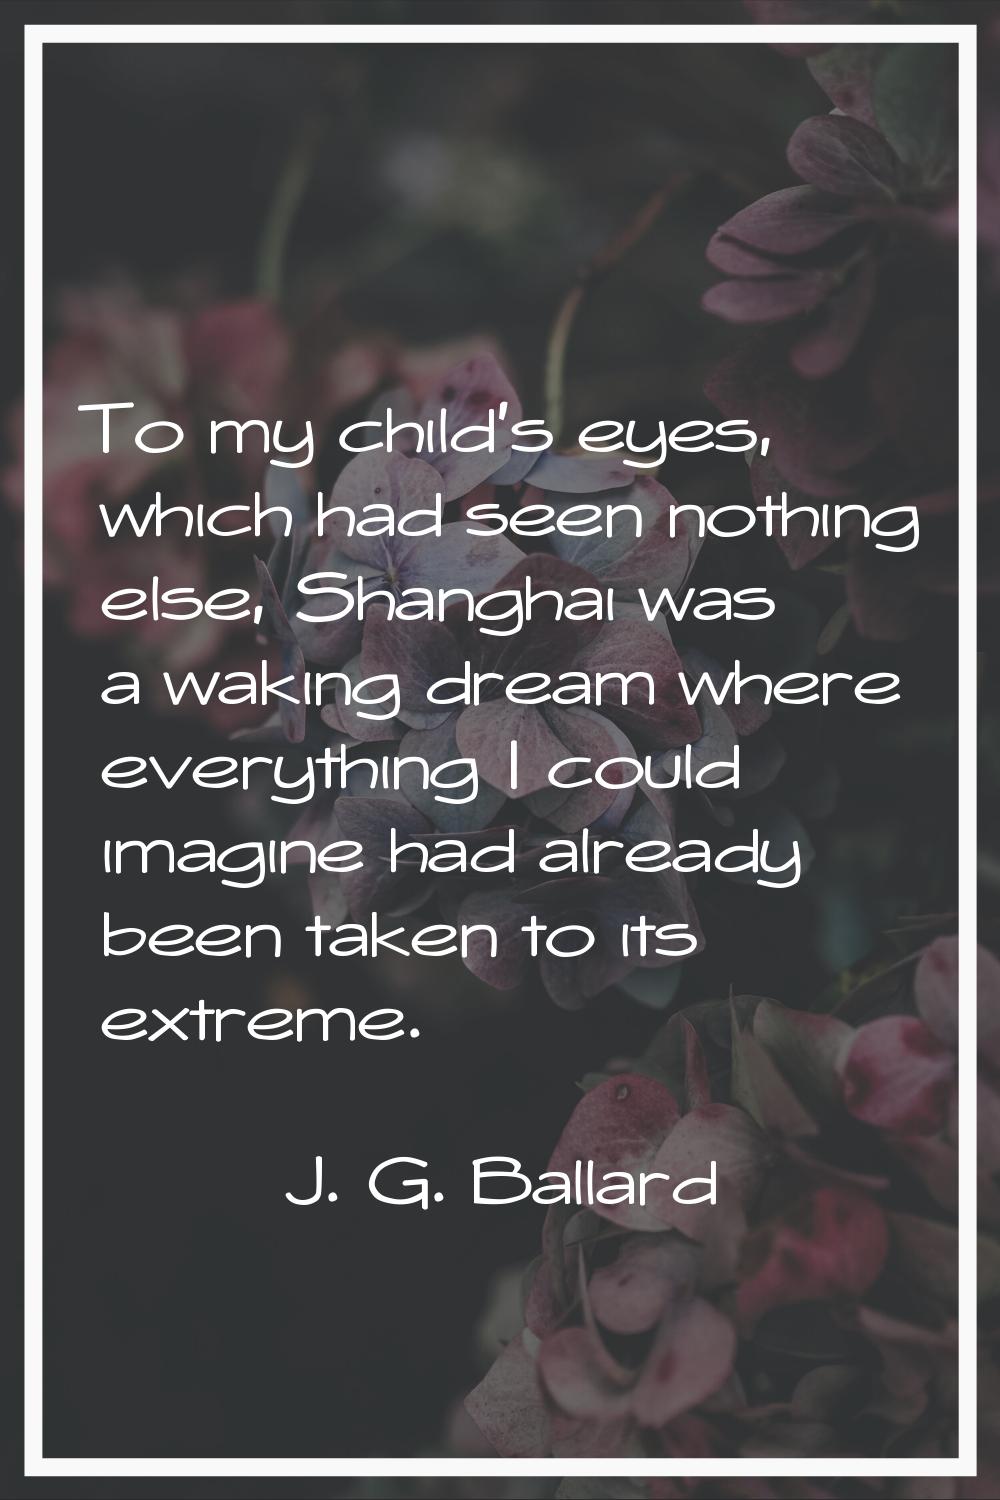 To my child's eyes, which had seen nothing else, Shanghai was a waking dream where everything I cou